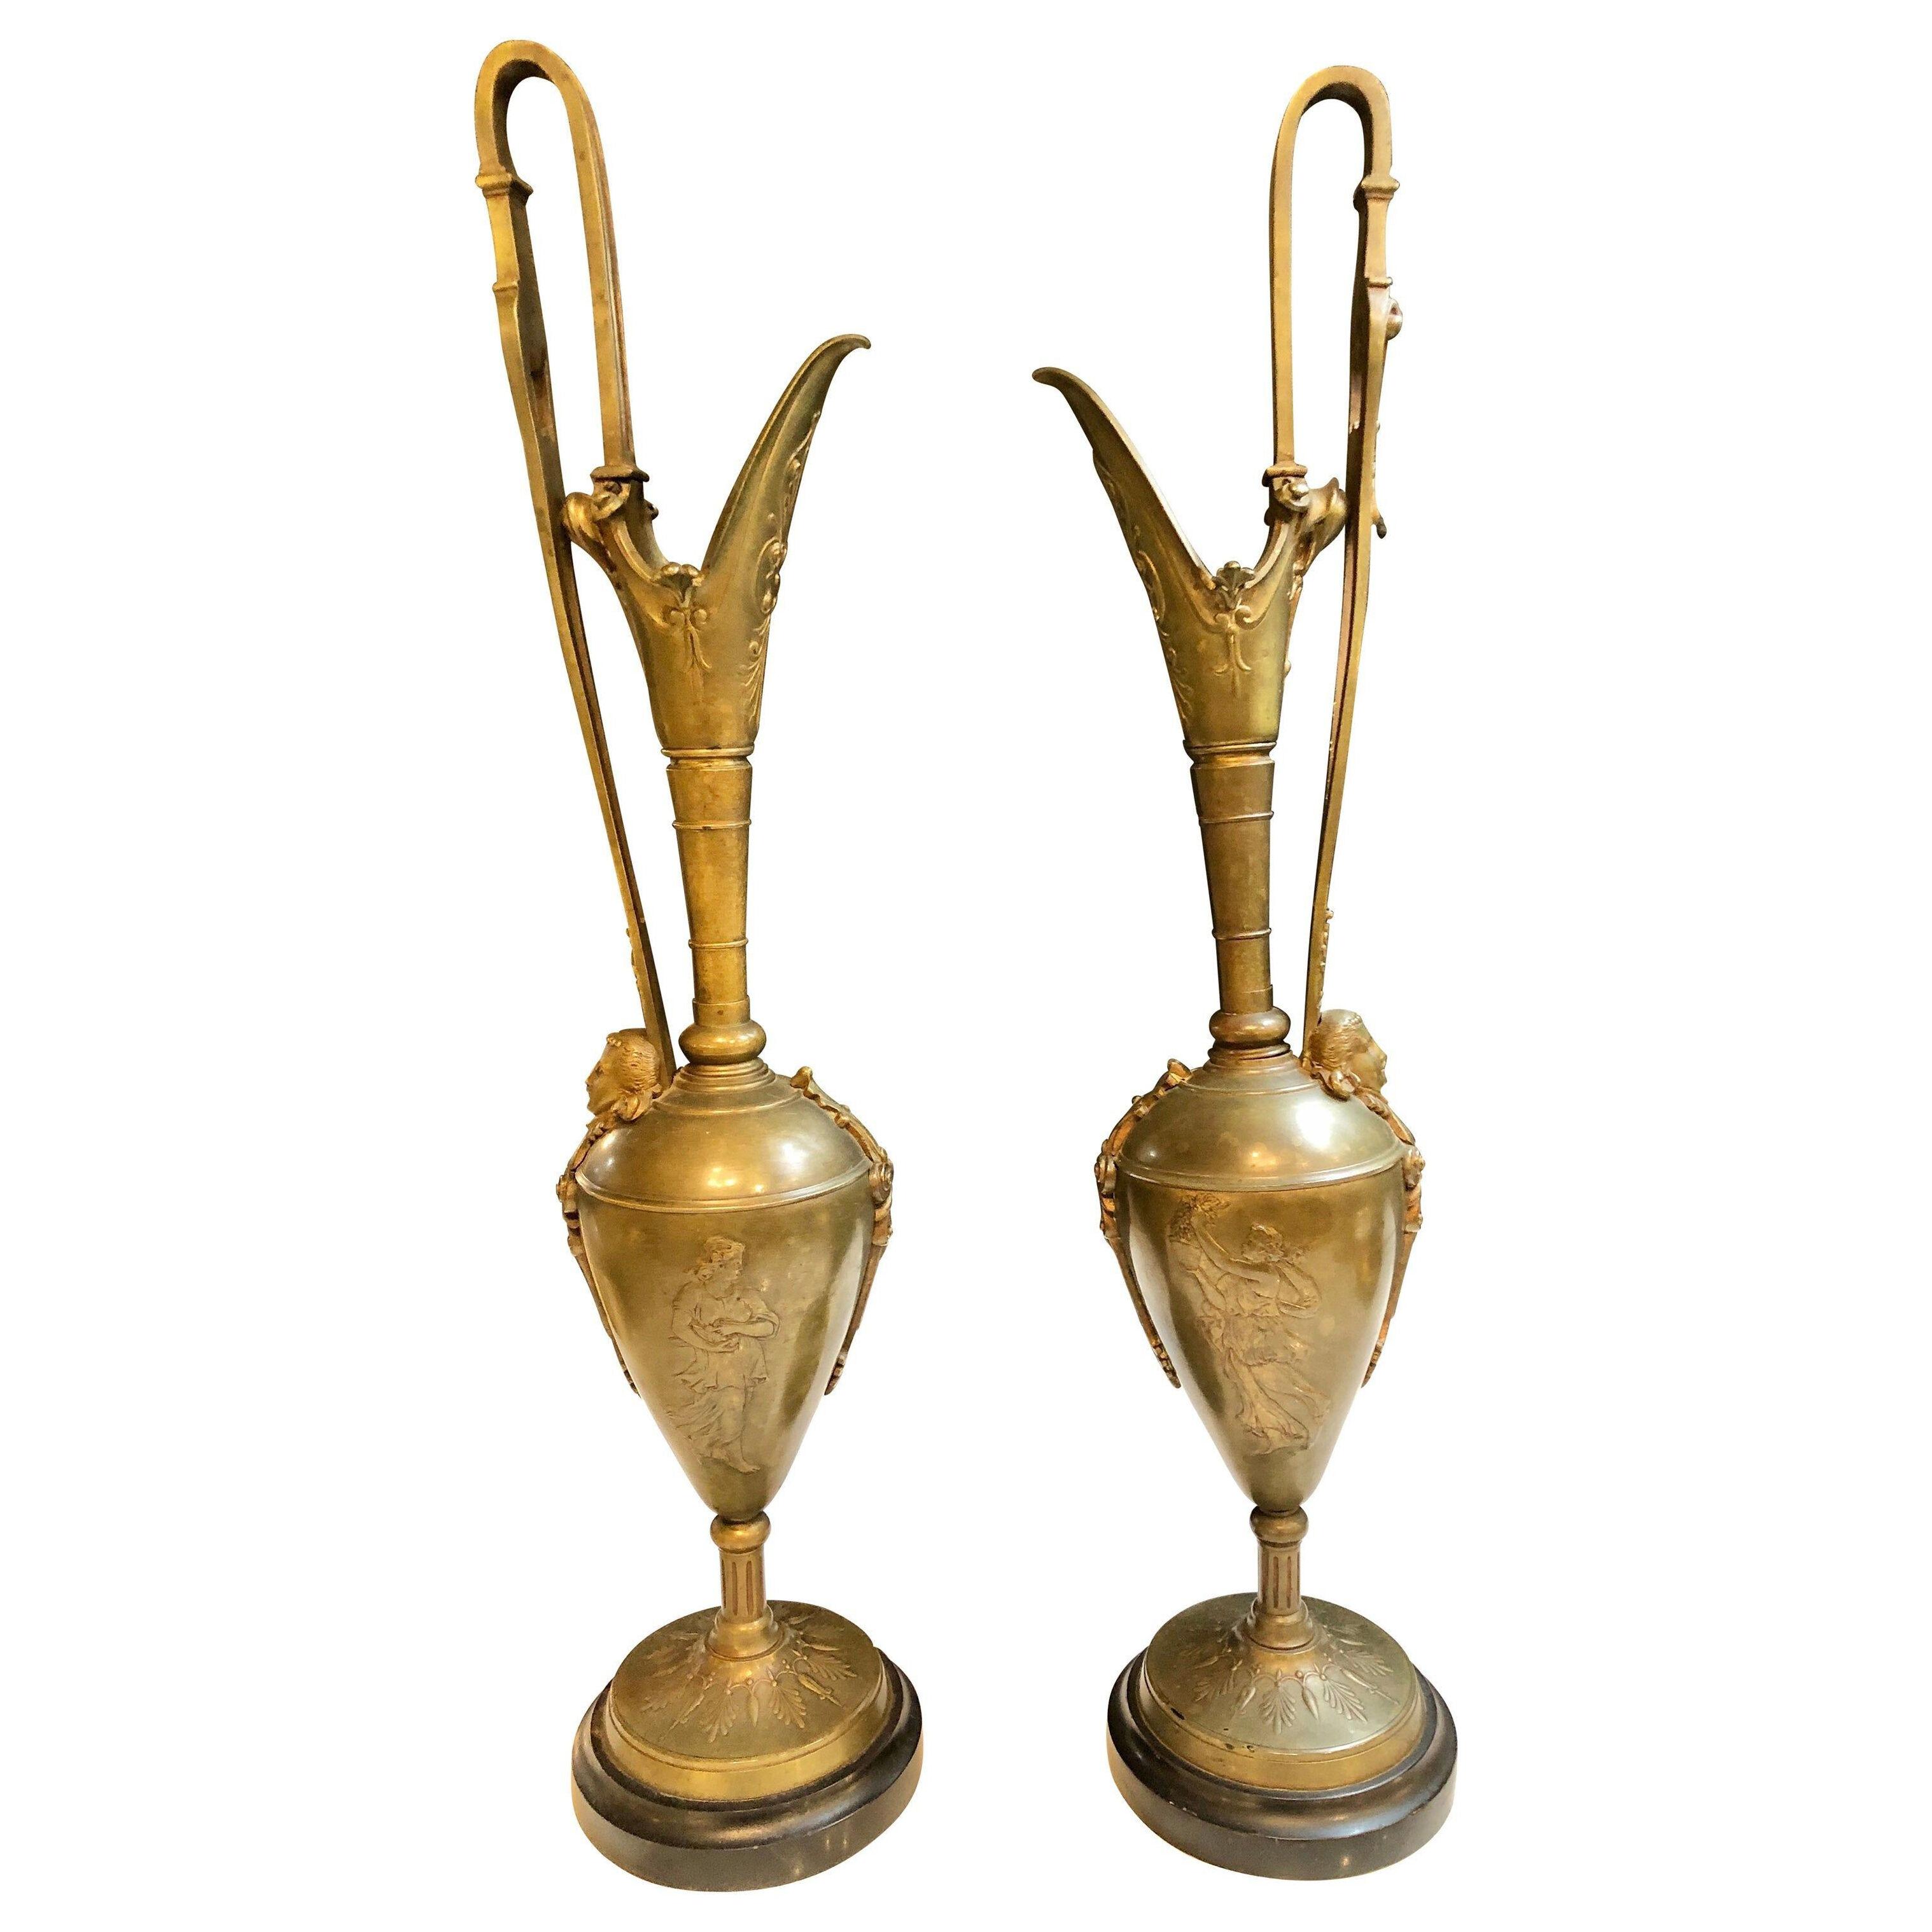 Pair of Classical Figural Bronze Neoclassical Ewers, 19th Century